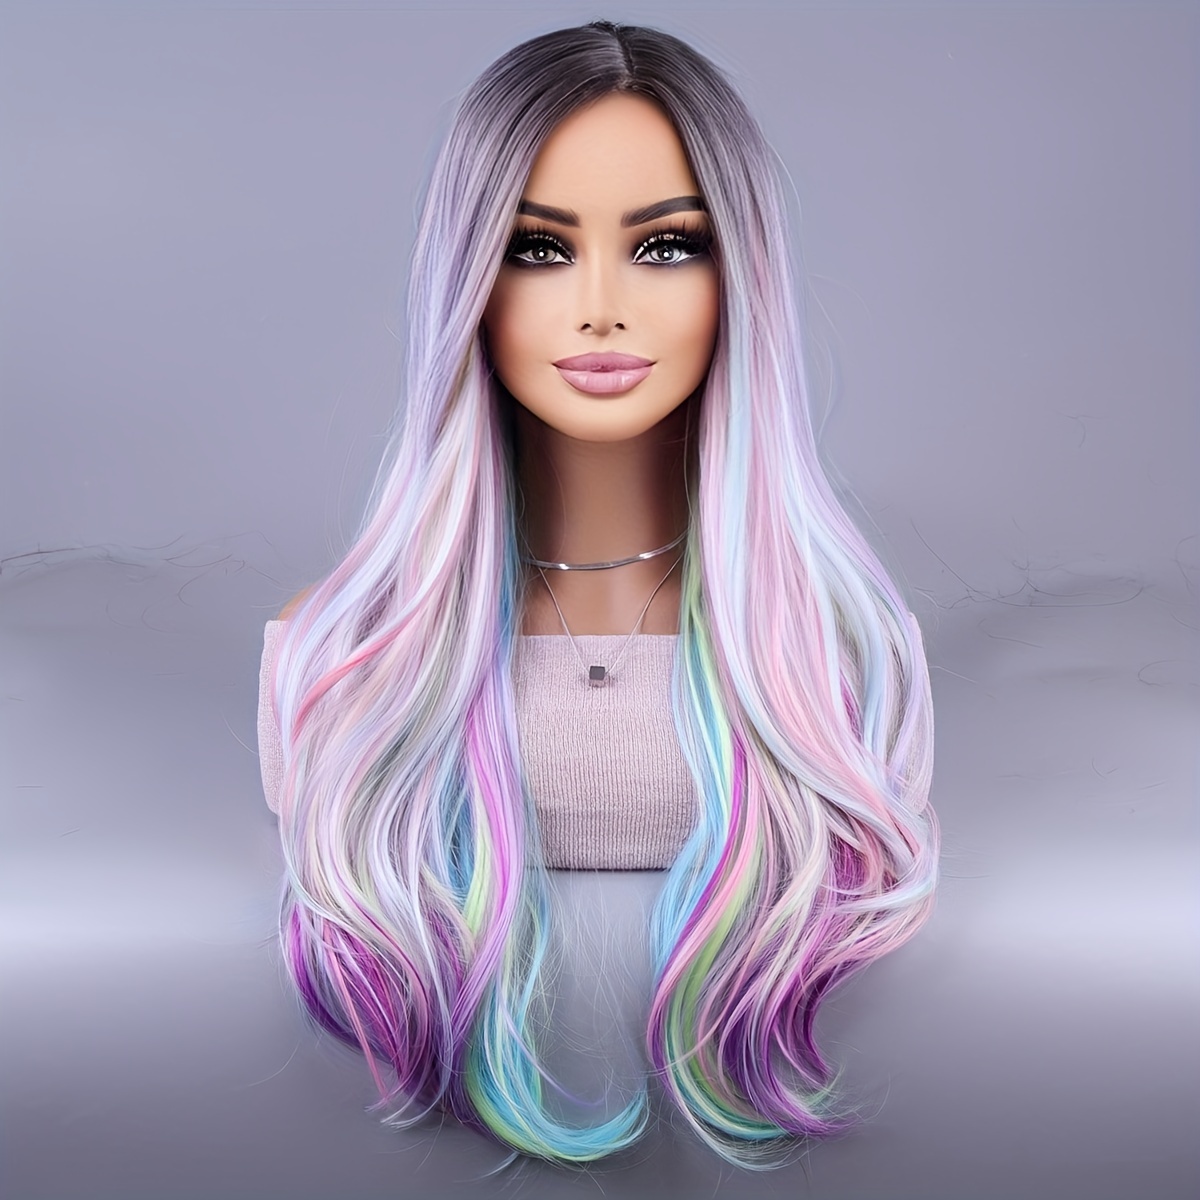 

Ombre Colorful Long Curly Wavy Wig Synthetic Wig Beginners Friendly Heat Resistant Elegant Natural Looking For Daily Use Wigs For Women Music Festival For Music Festival